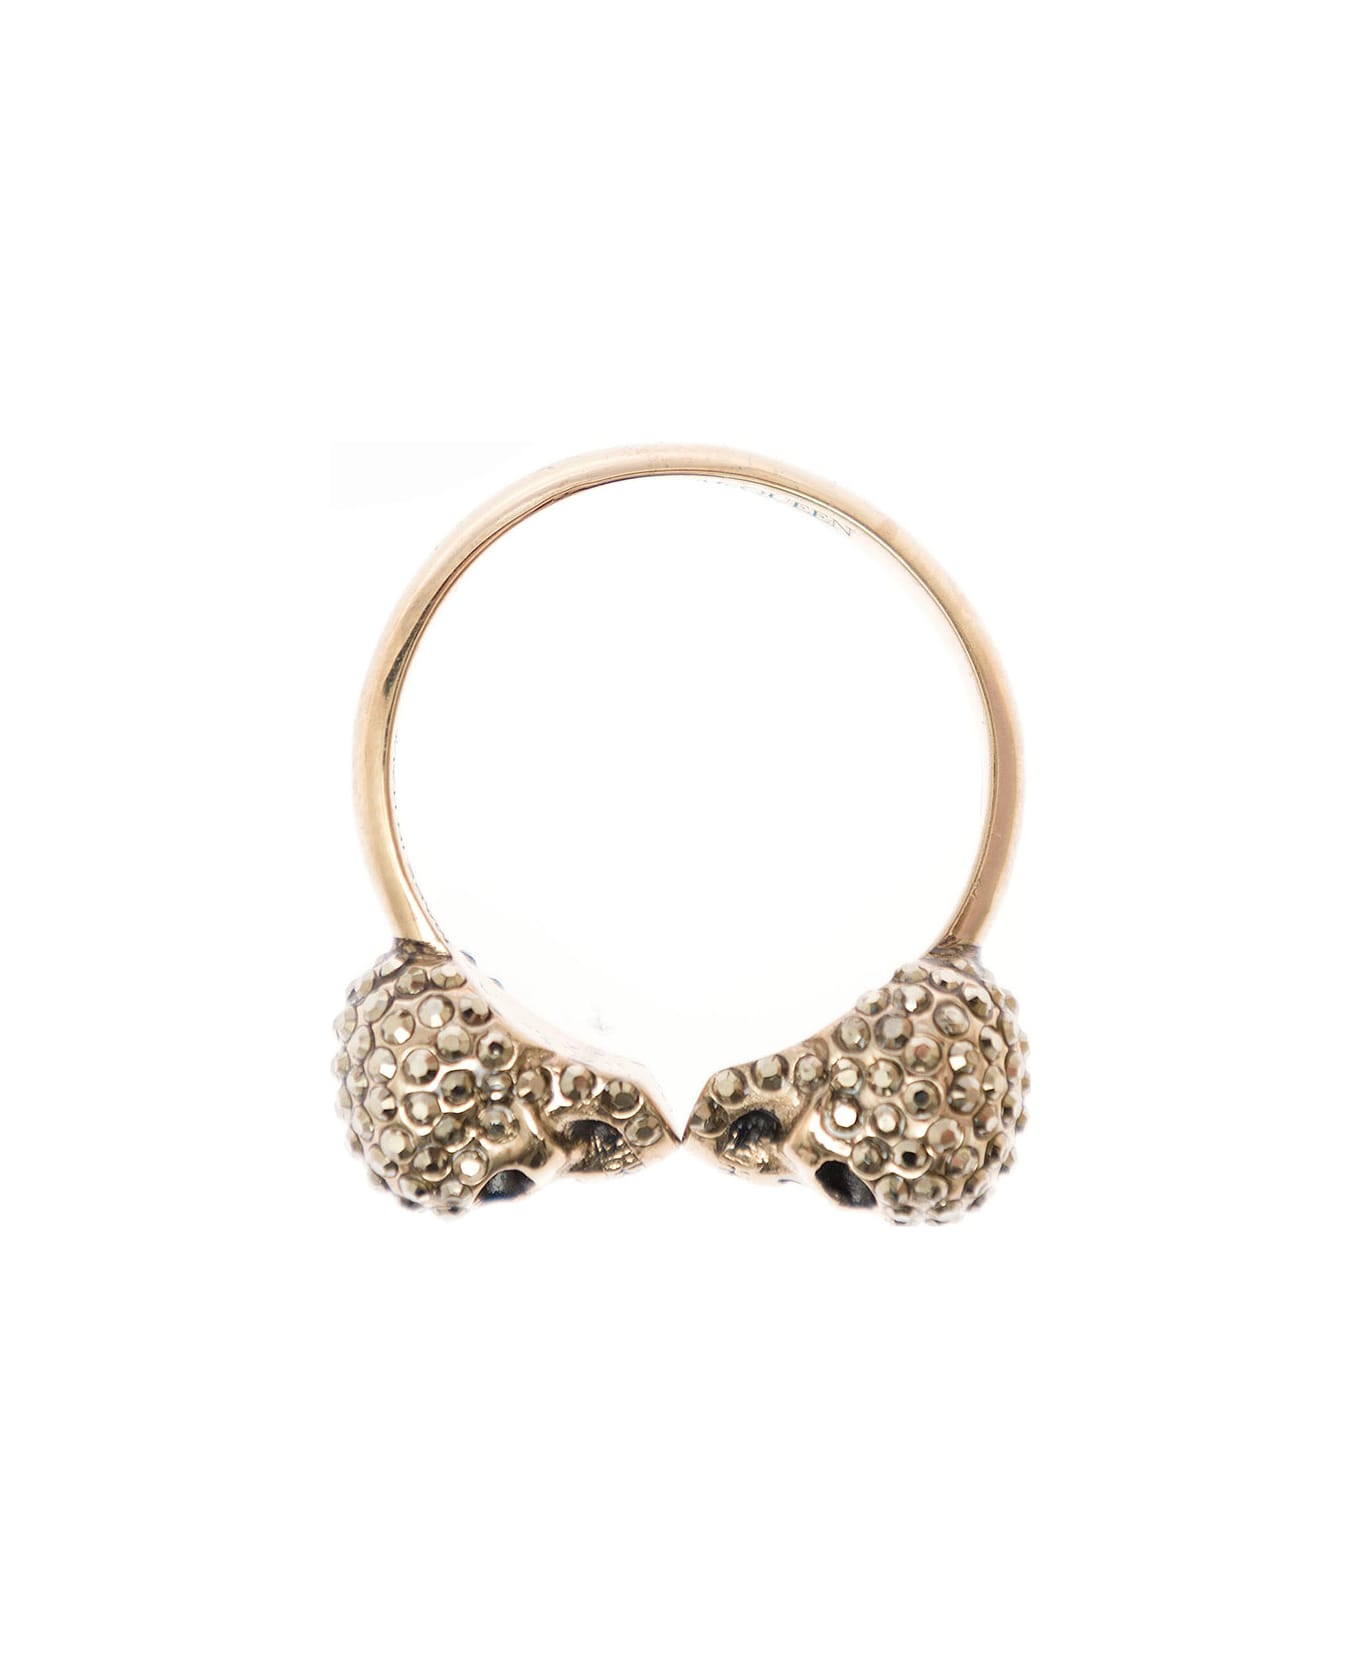 Alexander McQueen Woman's Brass Twin Skull Ring With Crystals Applied - Metallic